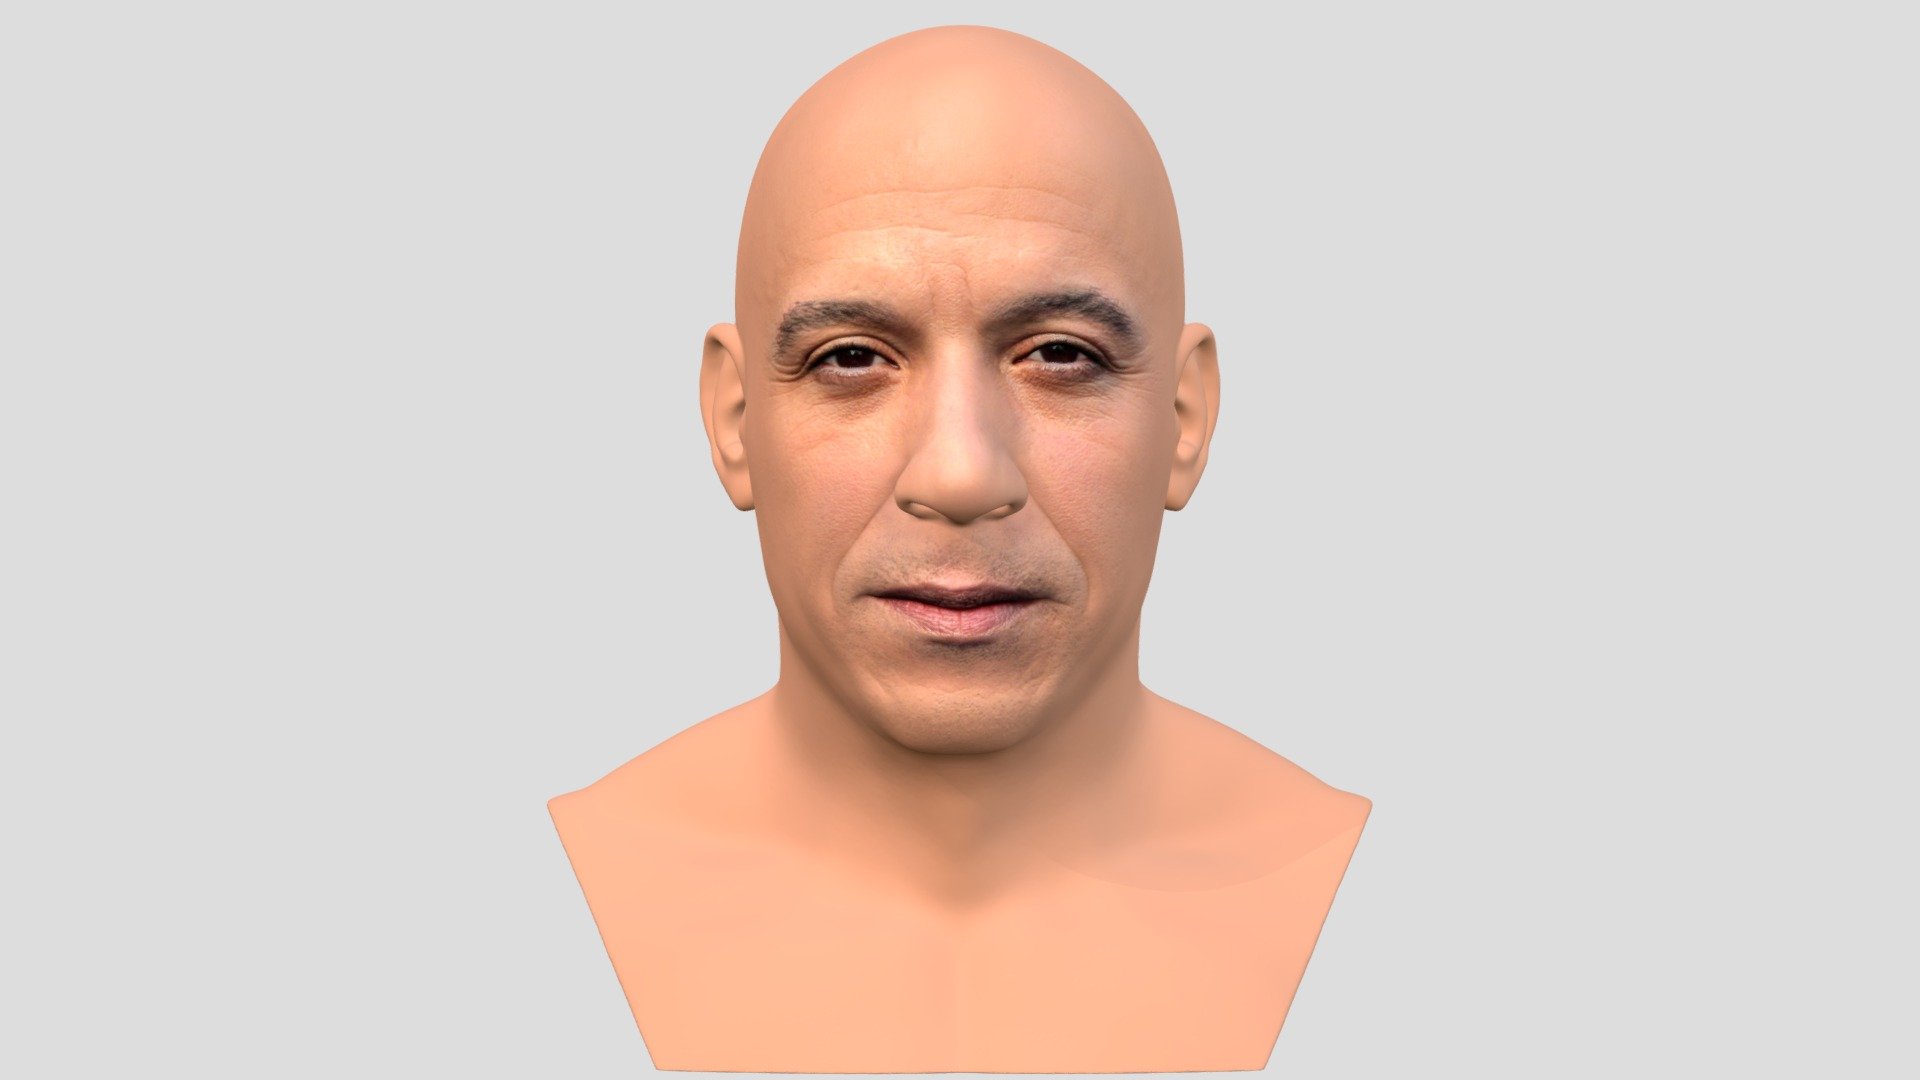 Here is Vin Diesel bust 3D model ready for full color 3D printing. The model current size is 5 cm height, but you are free to scale it. Zip file contains obj with texture in png. The model was created in ZBrush, Mudbox and Photoshop.

If you have any questions please don’t hesitate to contact me. I will respond you ASAP. I encourage you to check my other celebrity 3D models 3d model